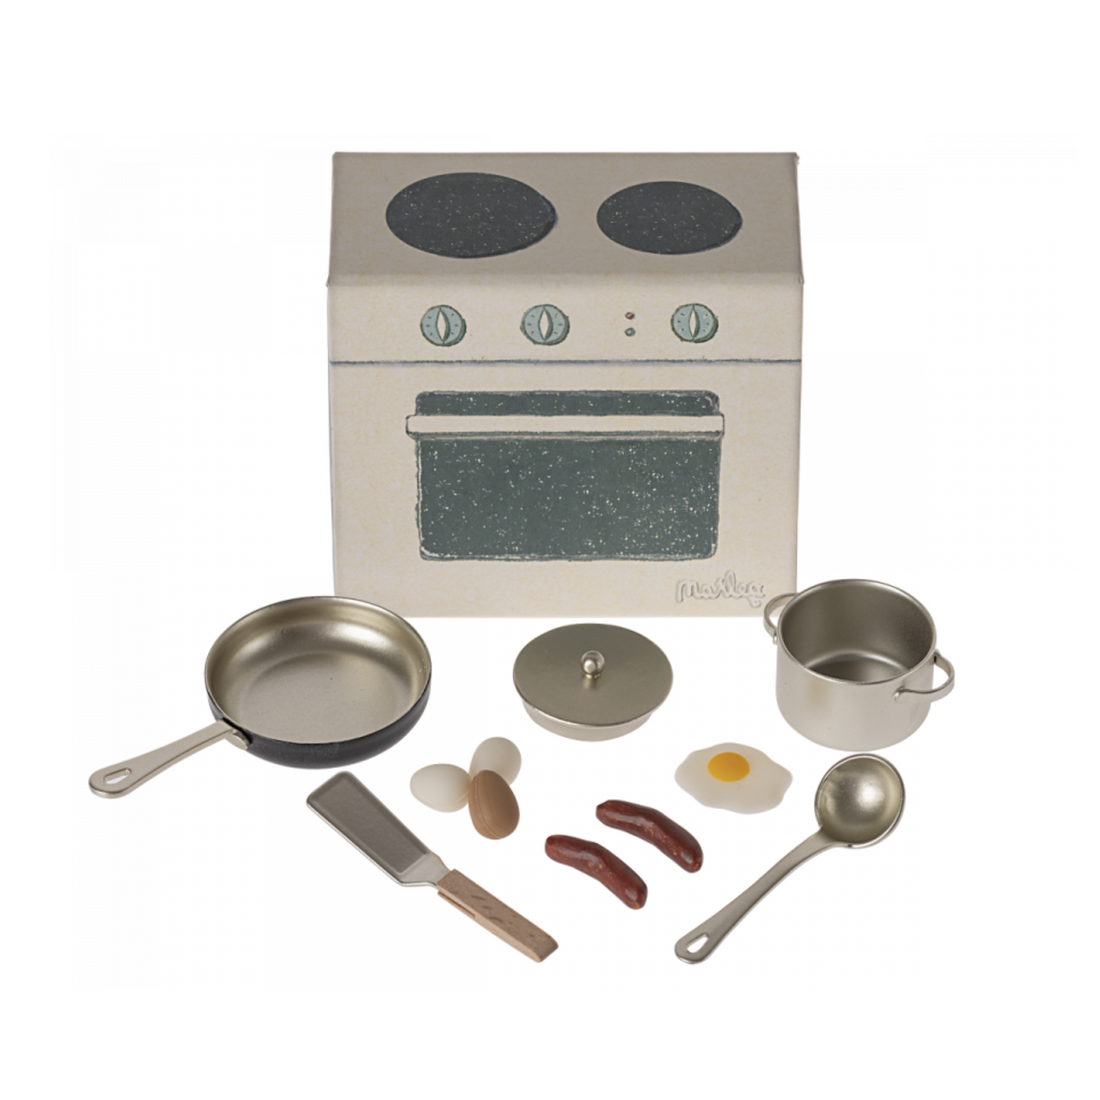 Mouse cooking set